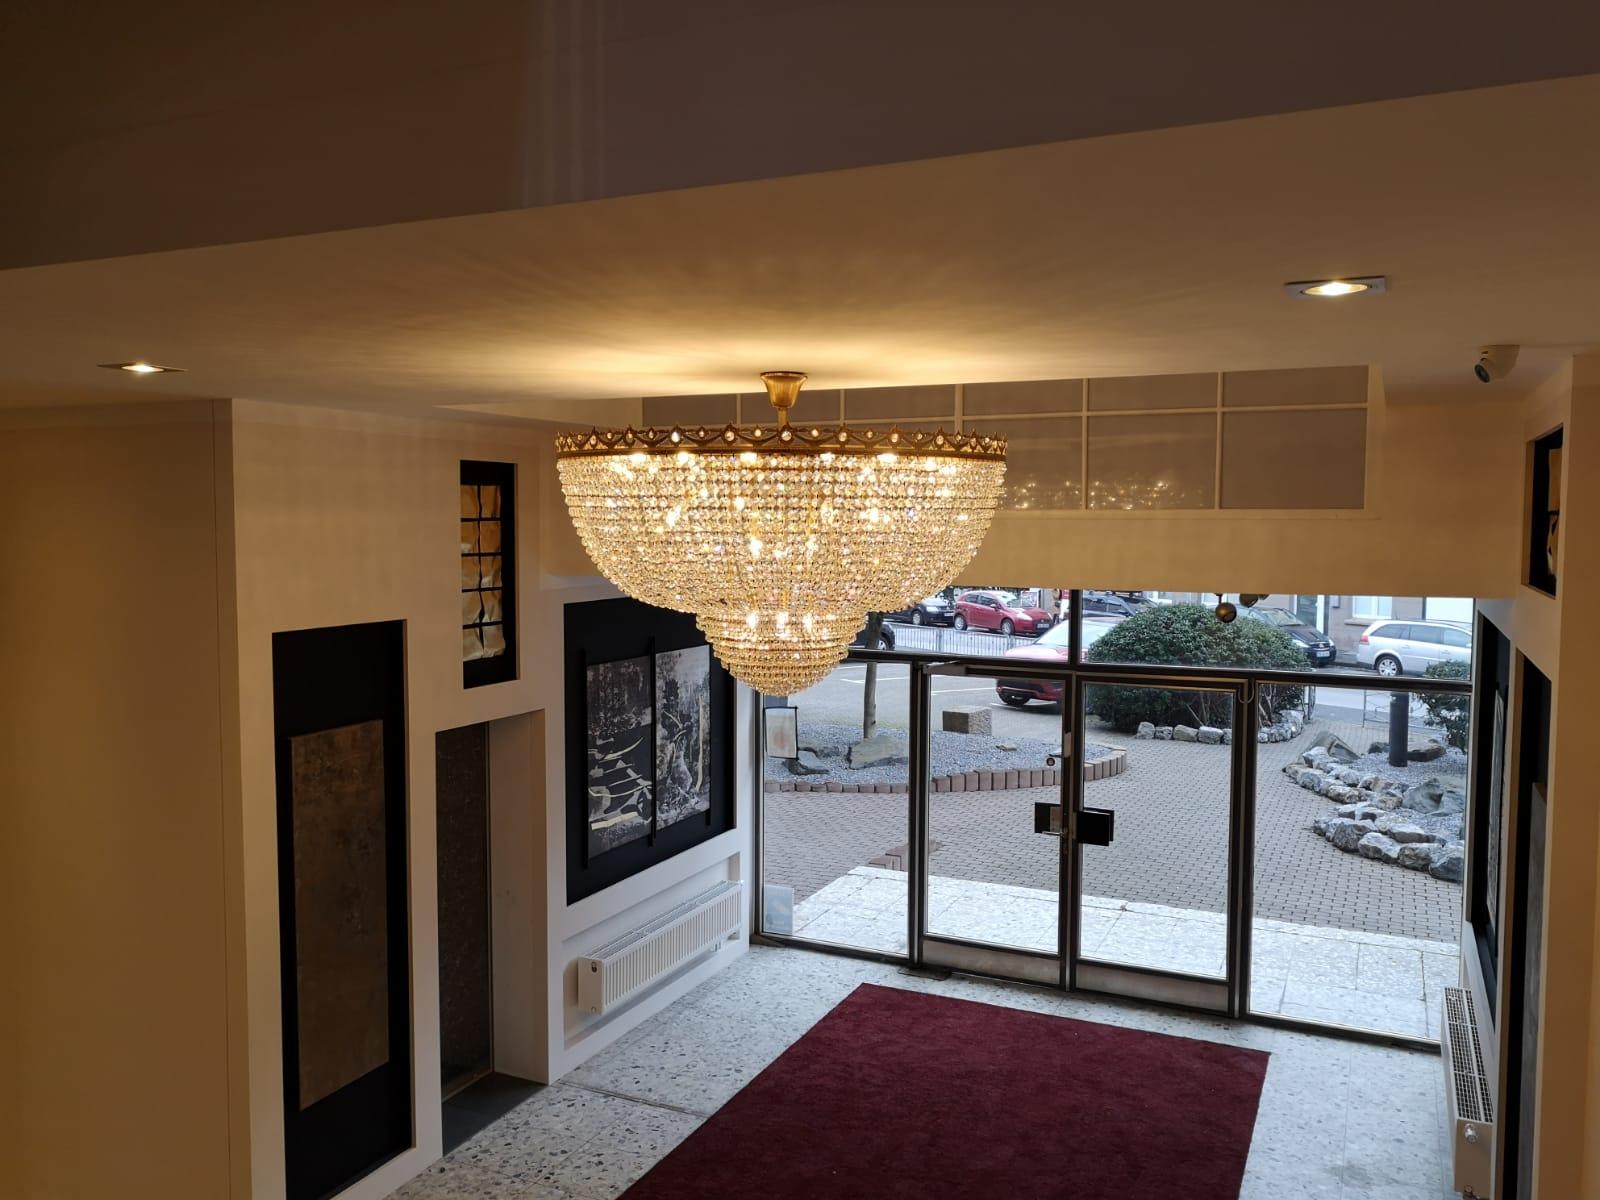 Montgolfière Style Chandelier: Tailored Empire Elegance

Introducing our new Montgolfière style chandelier, a magnificent embodiment of Empire splendor adorned with exquisite lead crystal. Crafted with precision in our Berlin atelier, this